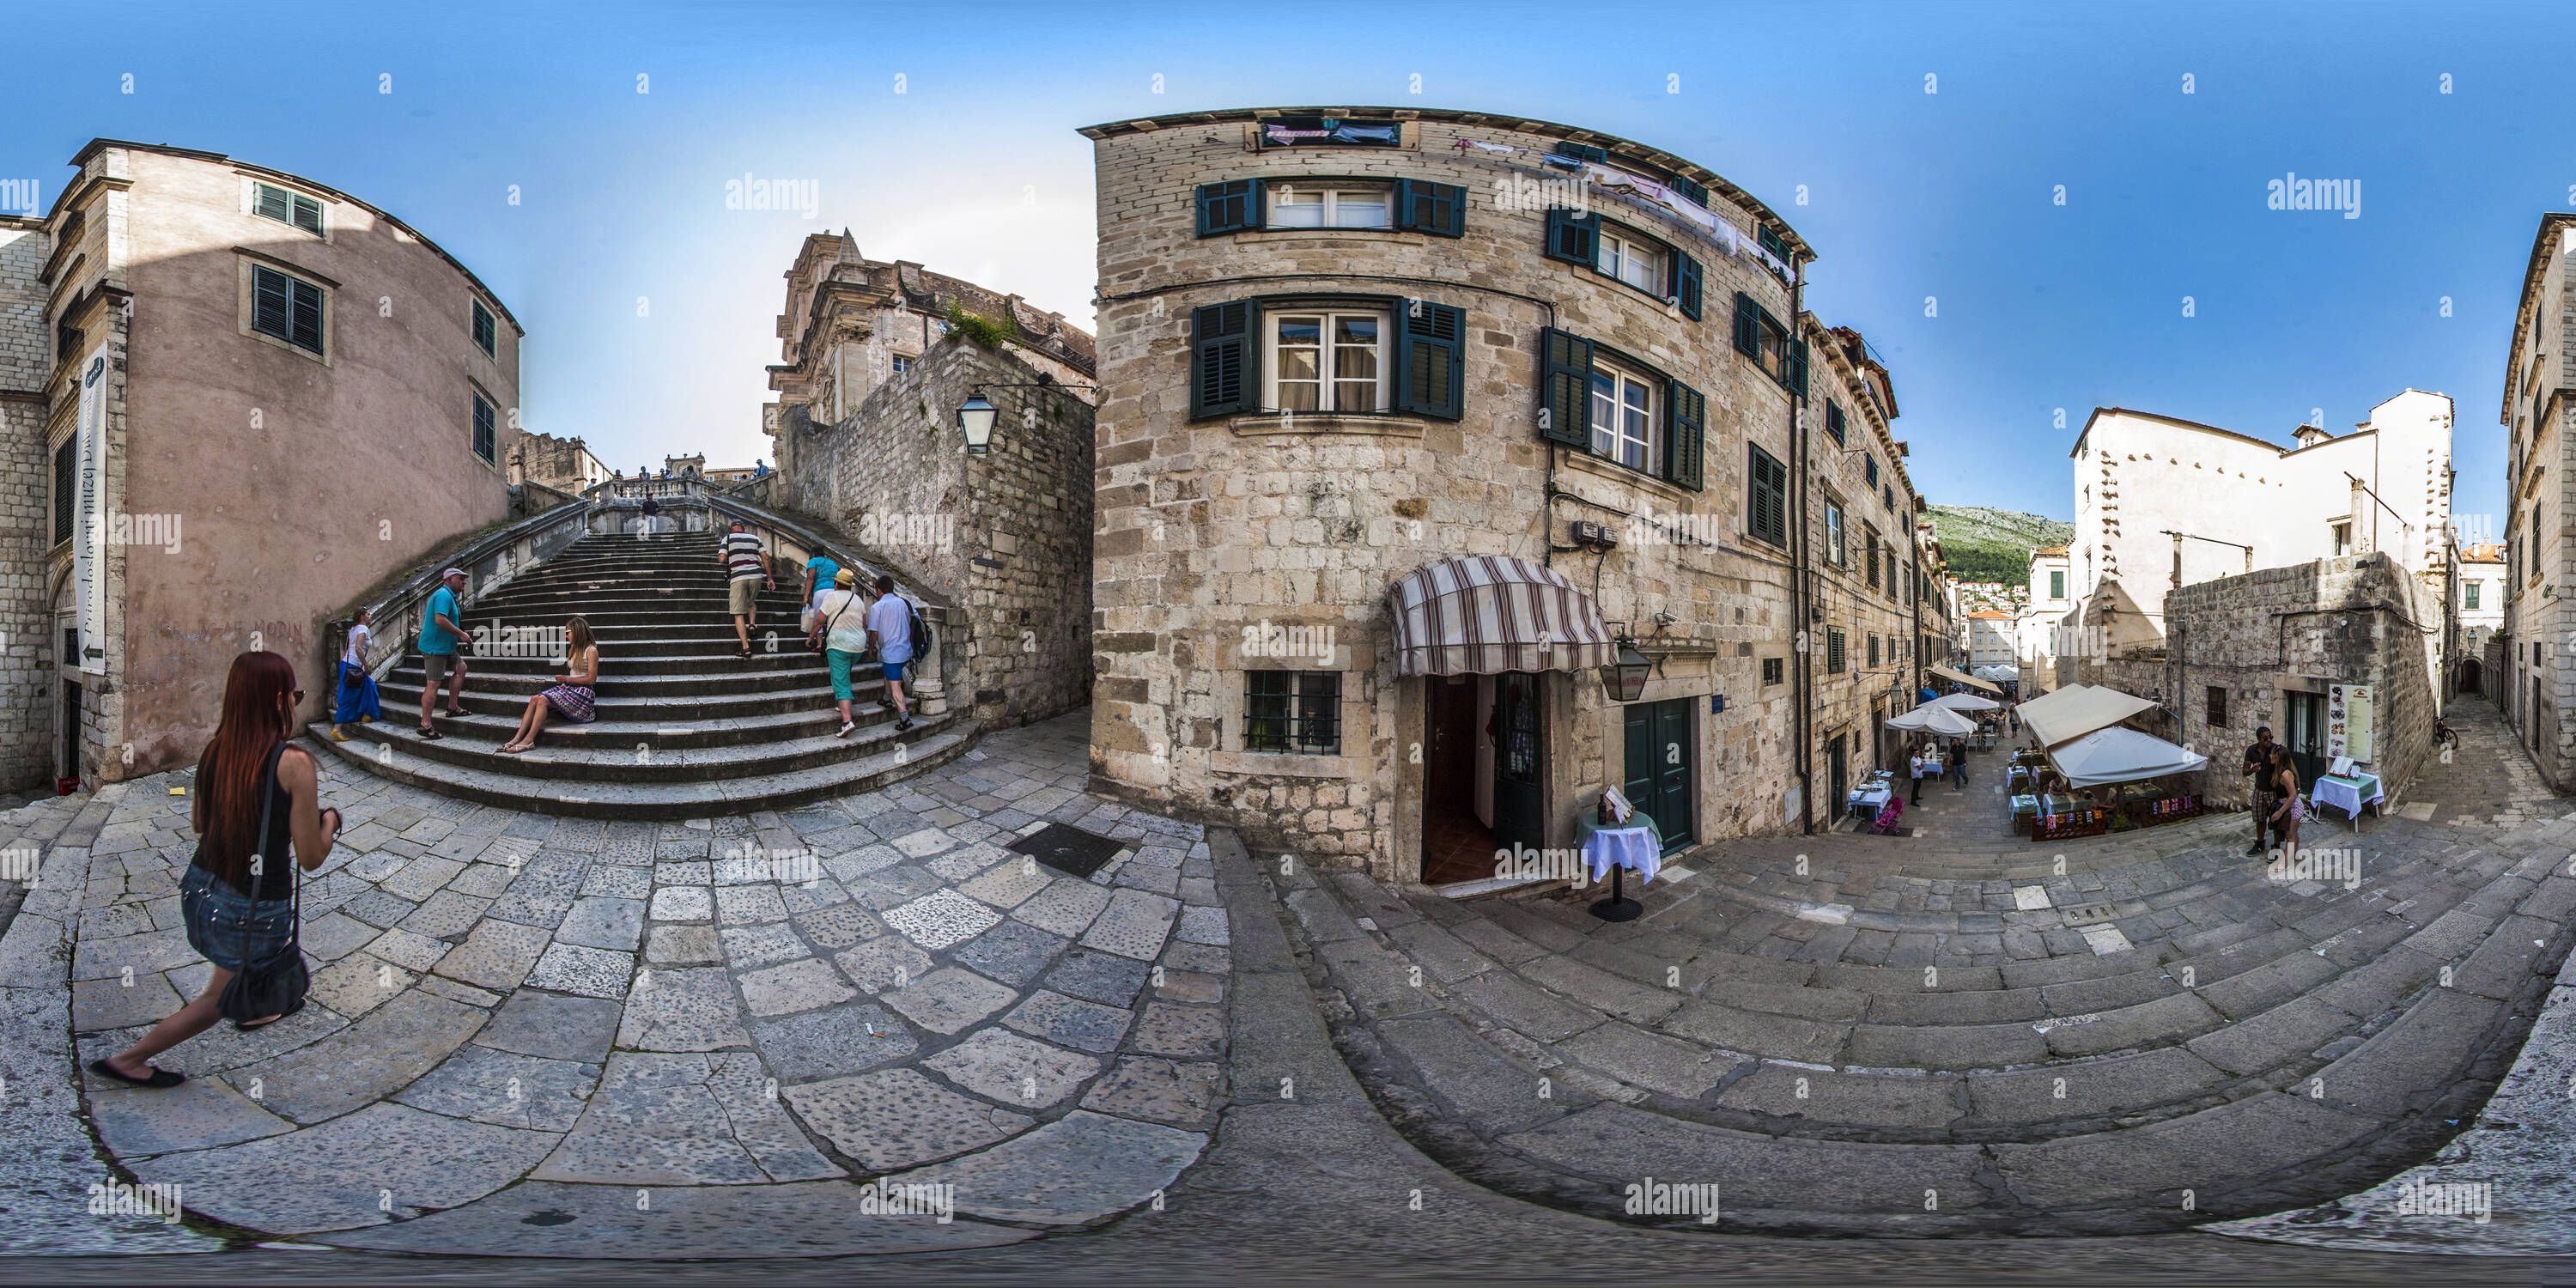 360 degree panoramic view of Stairs to Jezuit church in Dubrovnik